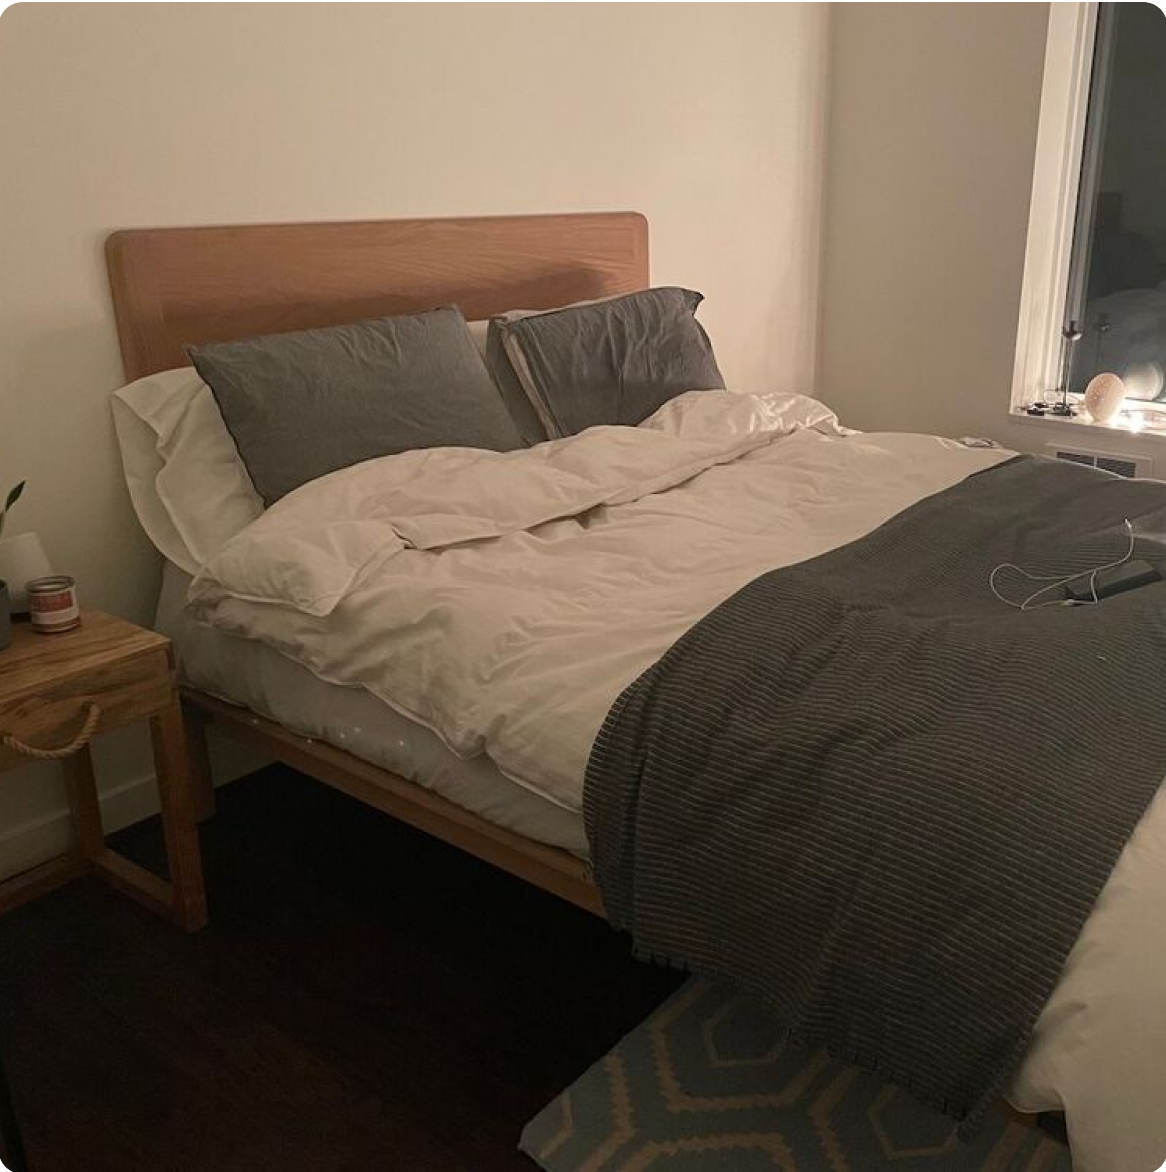 A neatly made bed with white sheets and gray pillows, beside a wooden nightstand.